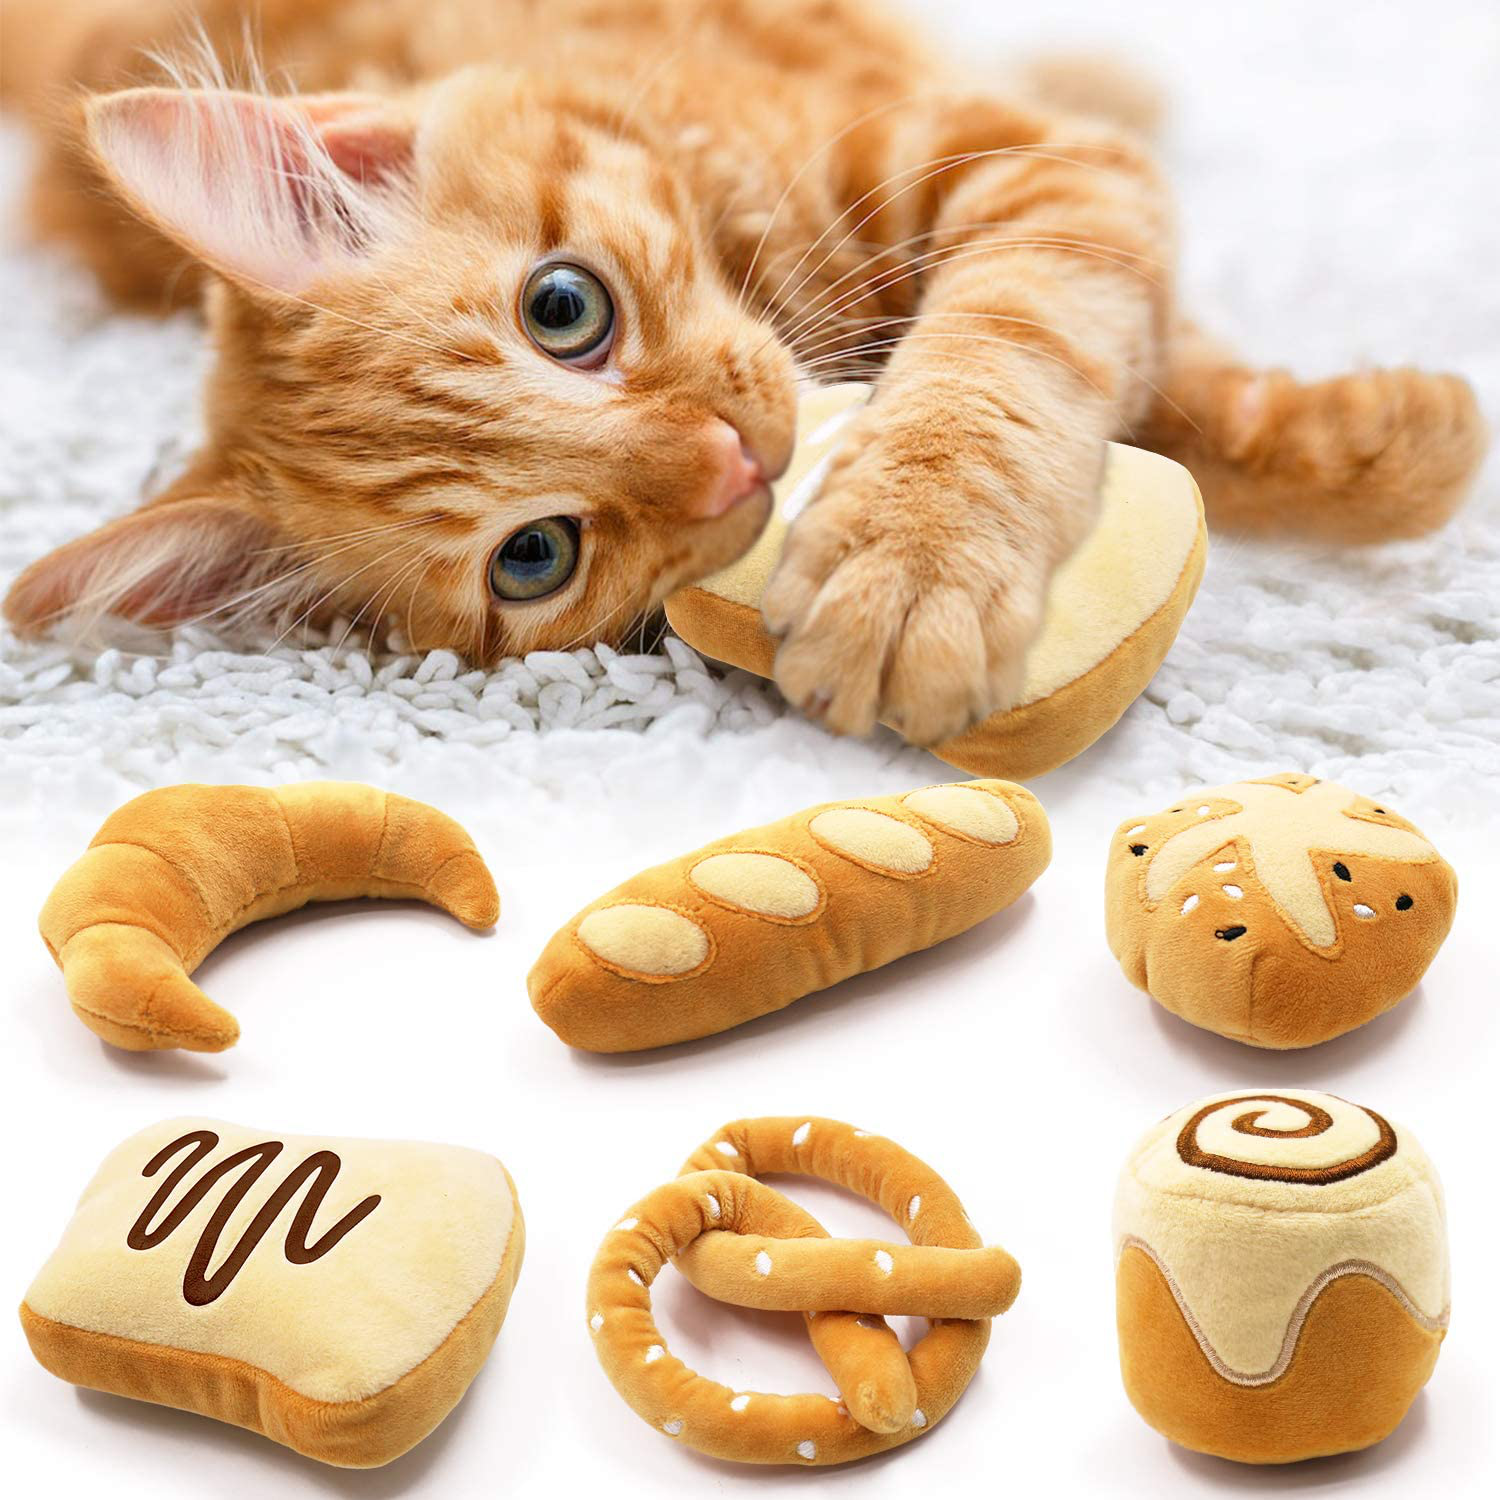 Bread Catnip Toys Kitten Interactive Toys for Cat Lover Gifts